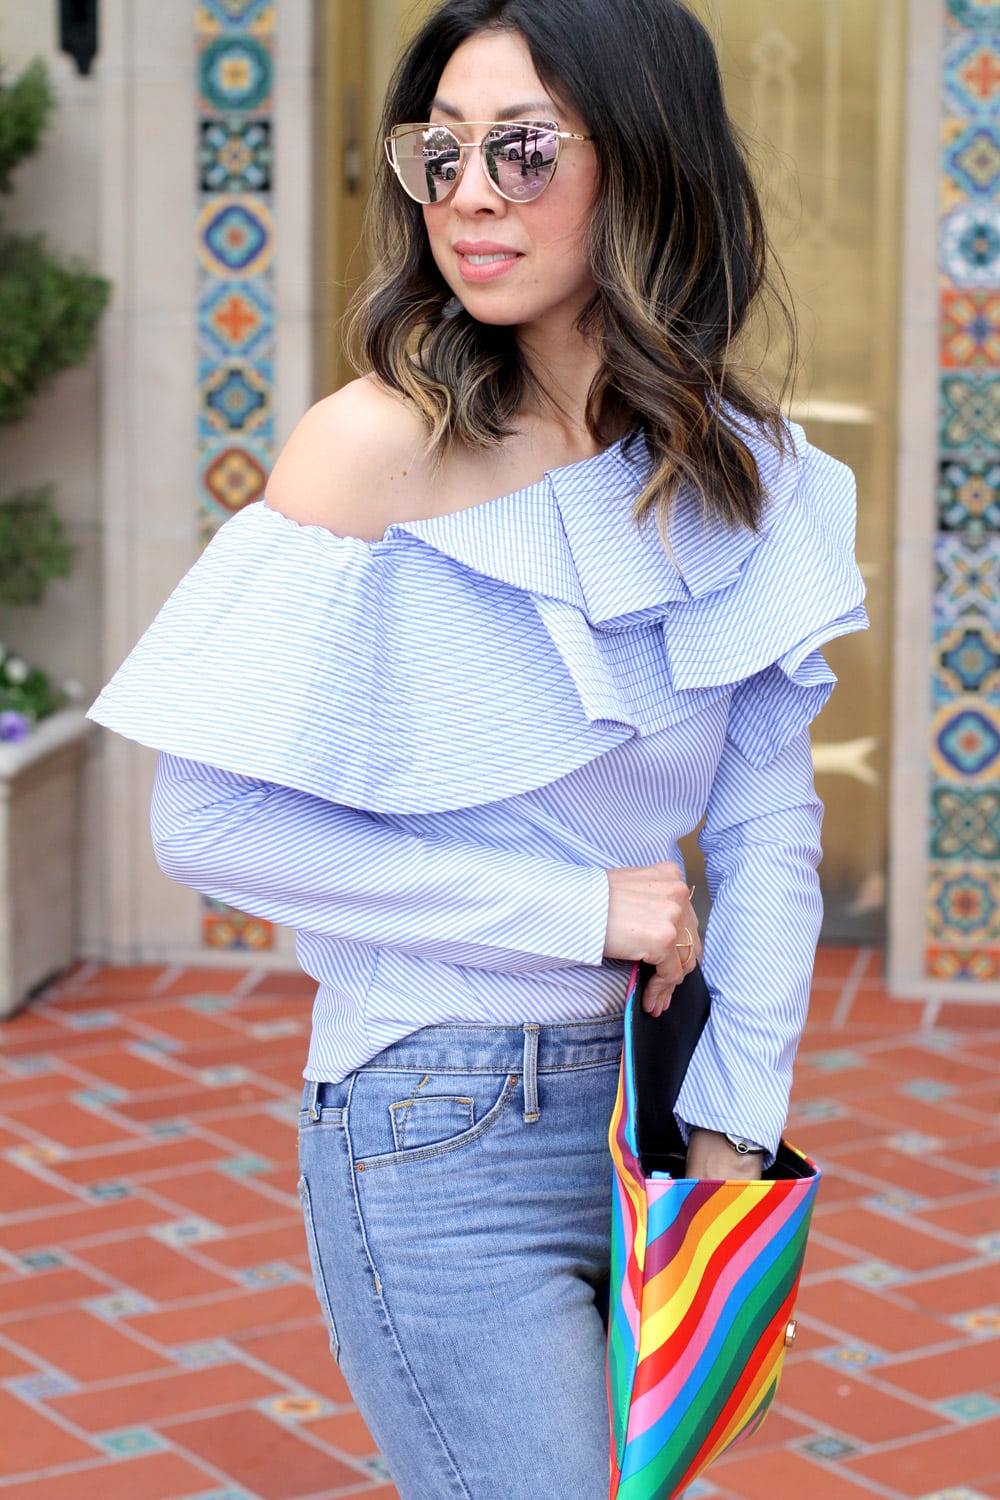 stylekeepers ruffle one shoulder top with ripped knee skinny jeans and rainbow clutch, pink pumps